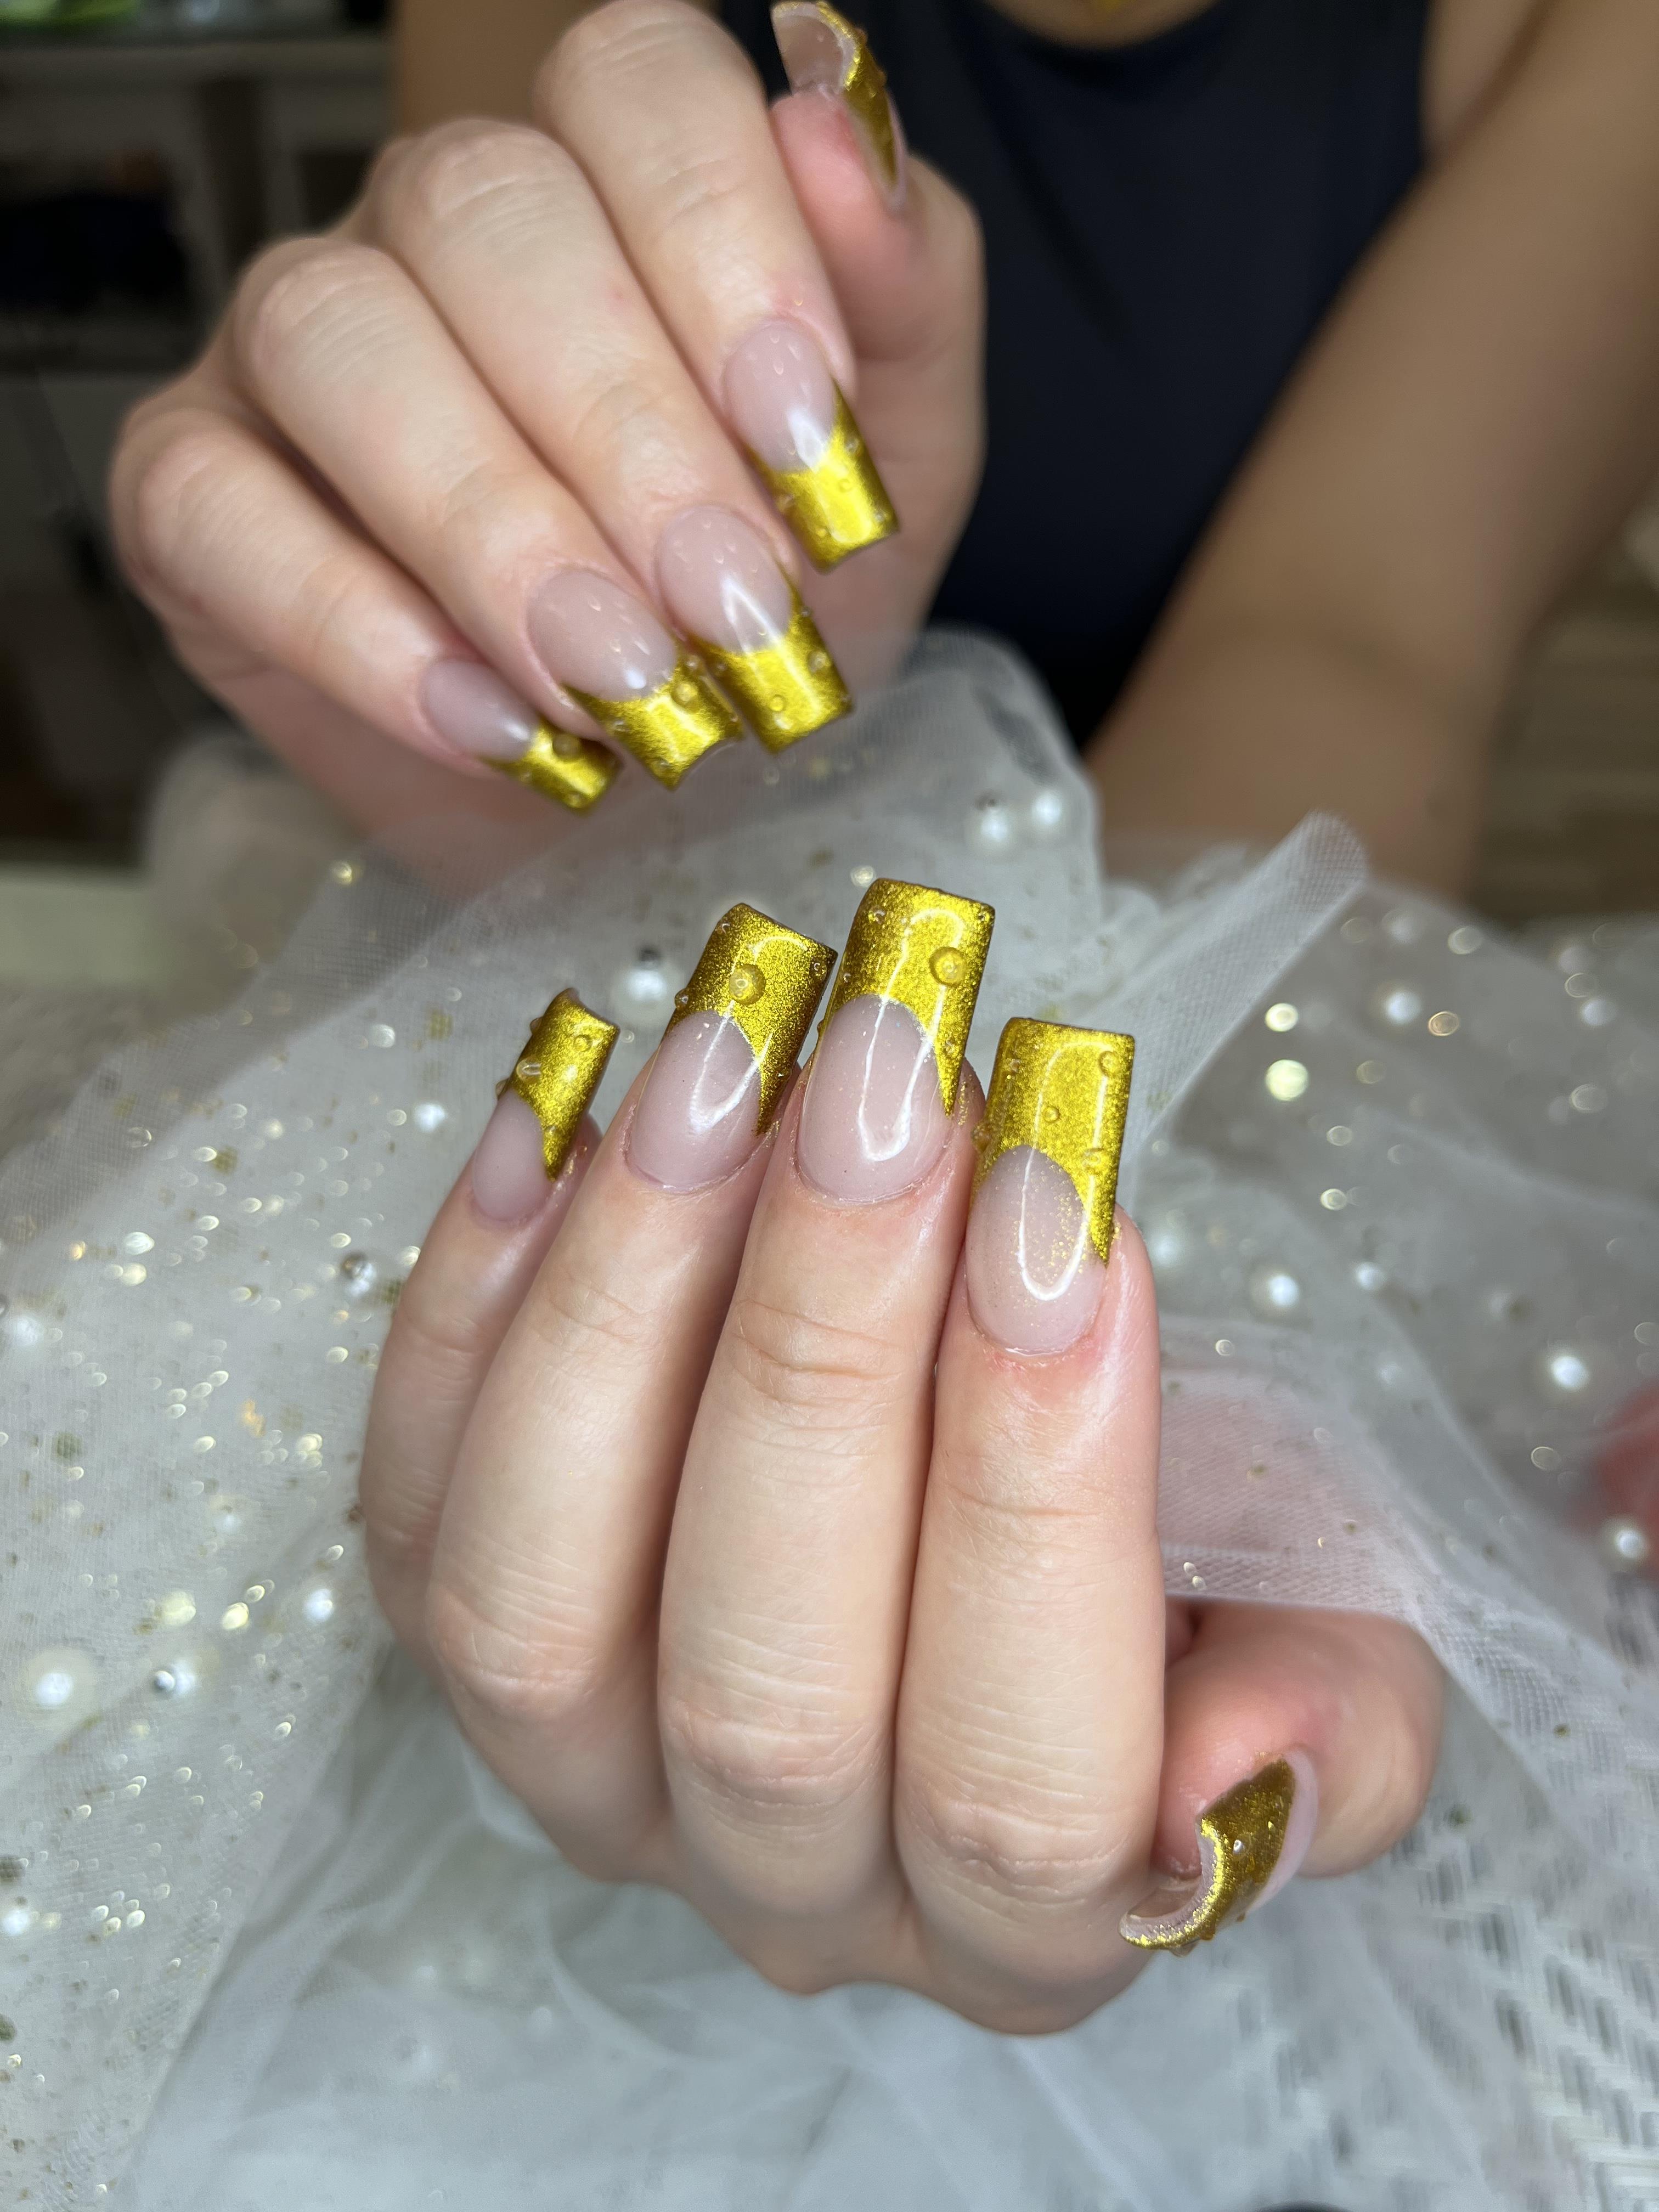 Golden Nails And Spa Little Rock - GOLDEN NAILS AND SPA at 11610 Pleasant  Ridge Rd, Little Rock, AR 72223 - The best beauty salon ⏰ hours, ✓ address,  map, ➦ directions, ☎️